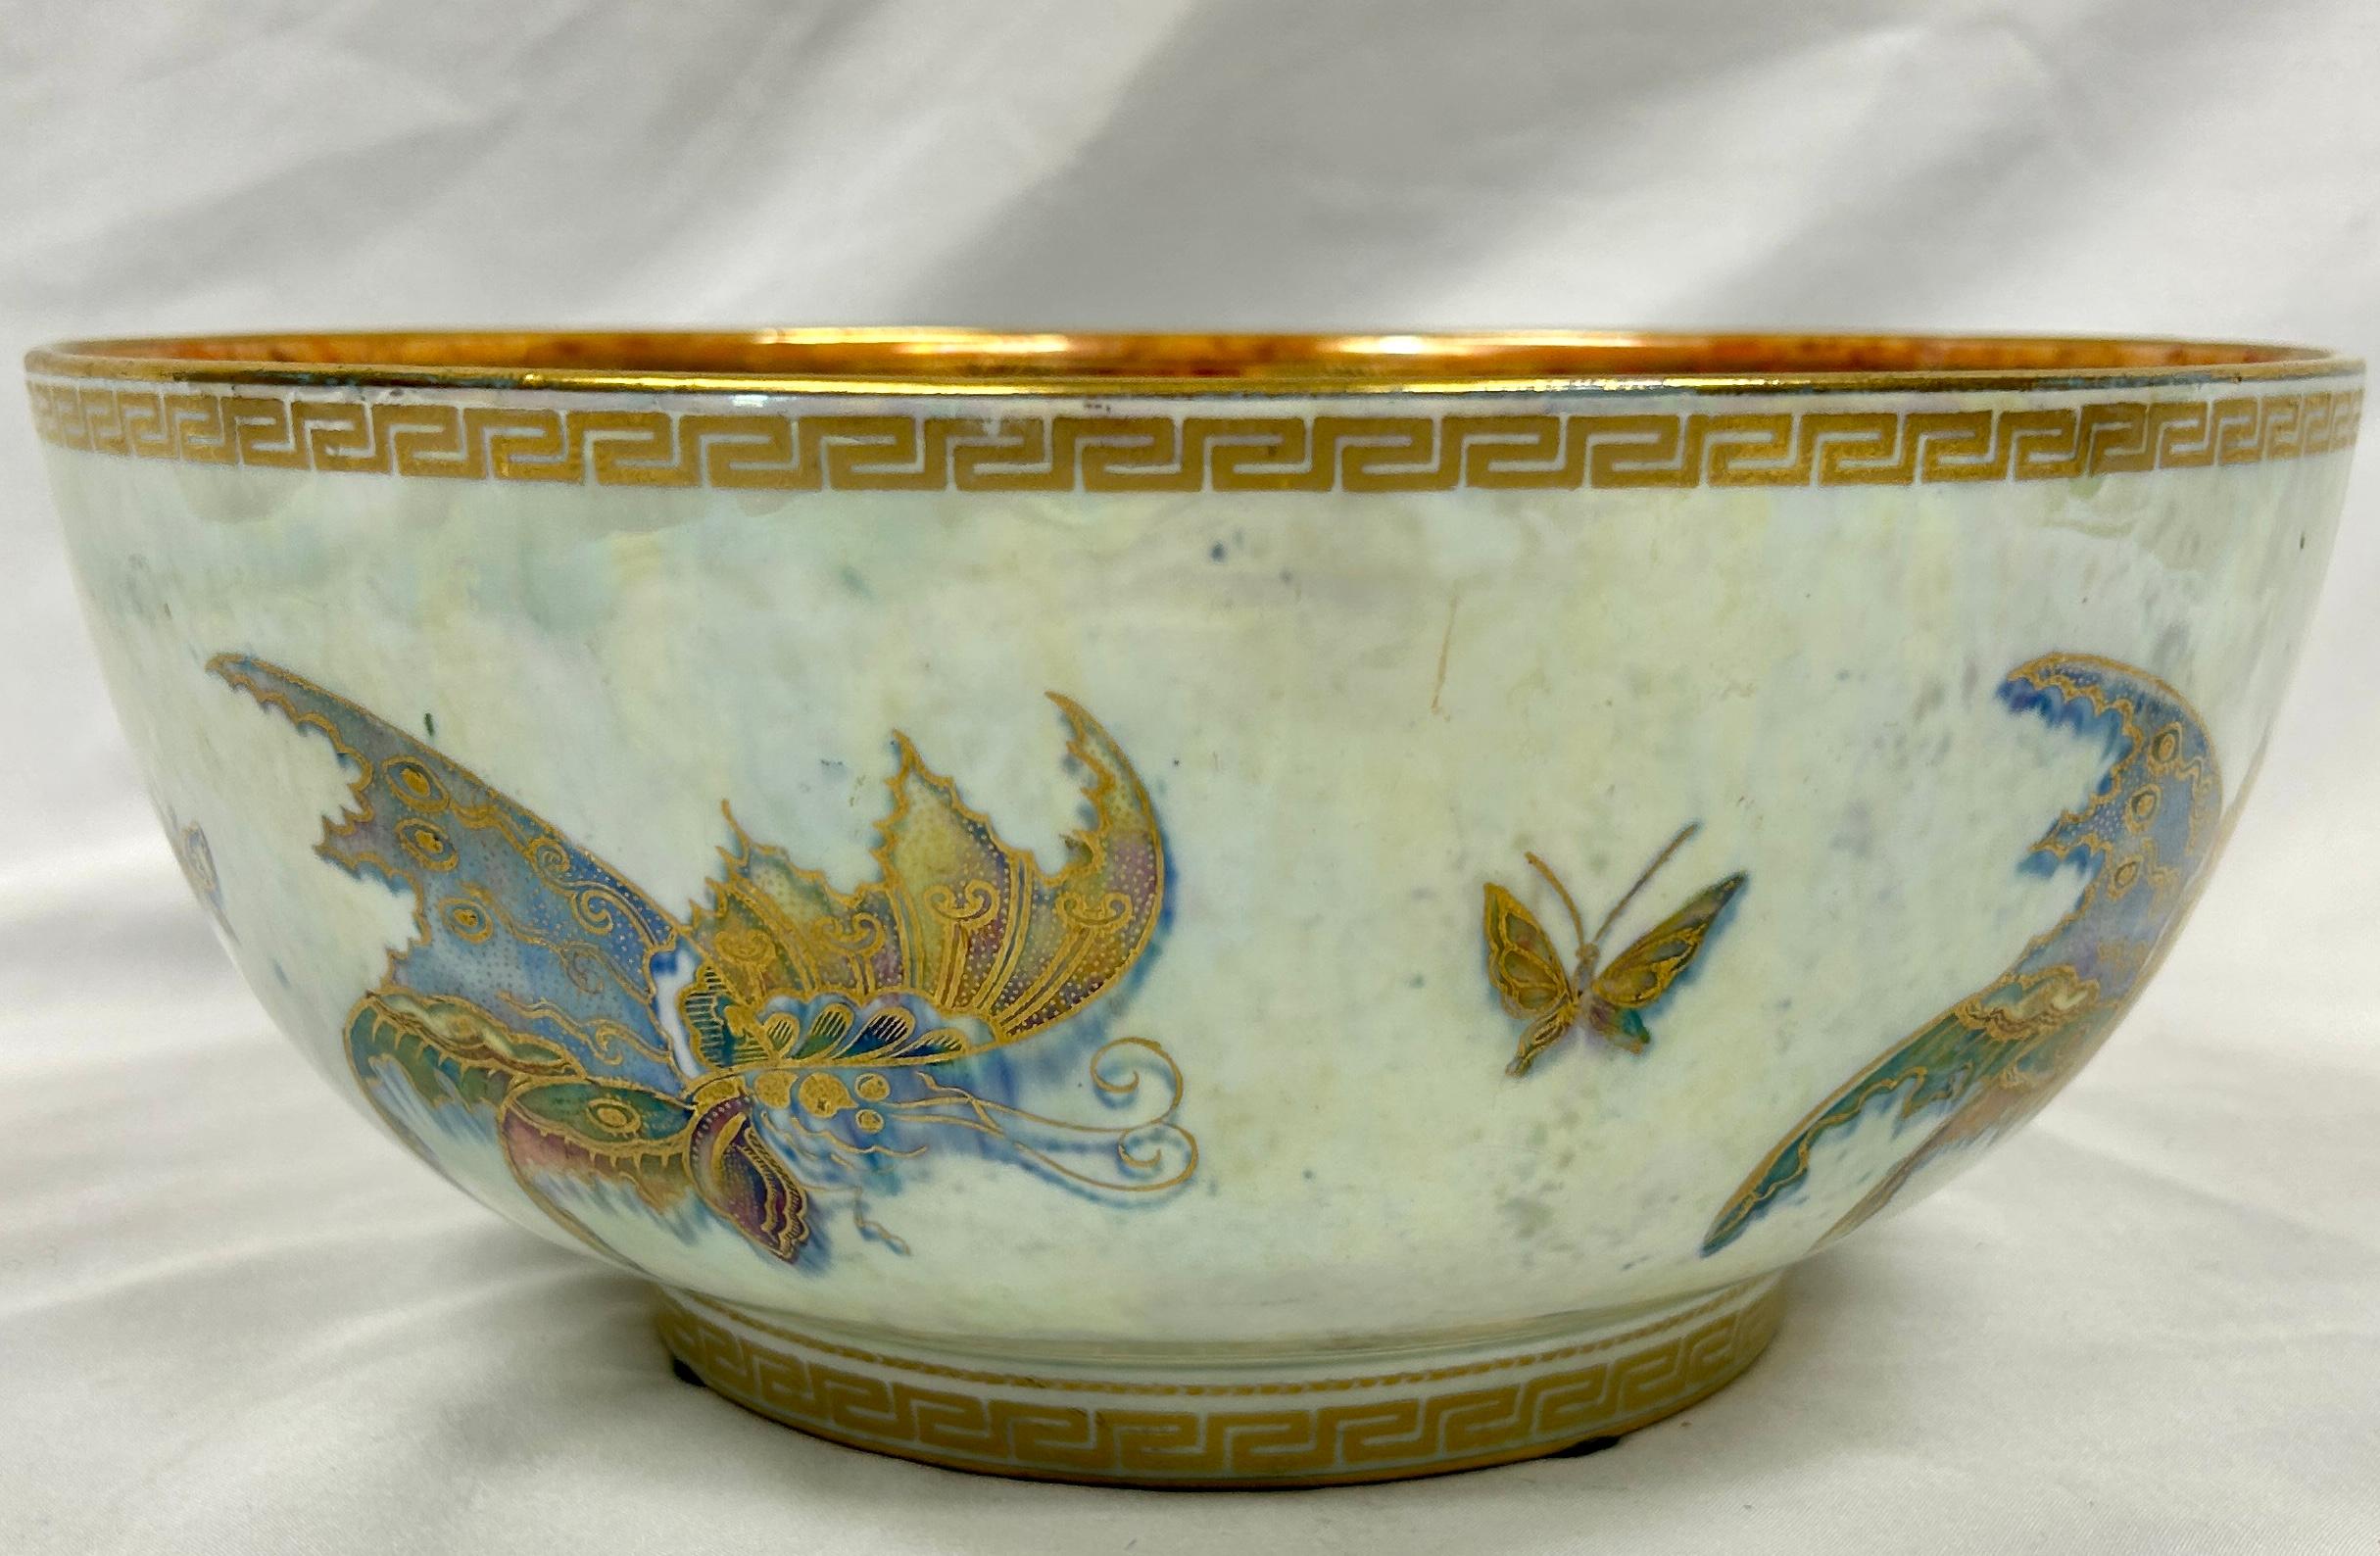 Stunning large English Wedgewood Fairyland Butterfly Lustre Bowl is an example of Daisy Makeig-Jones' unique artistry. The butterfly pattern is Z4832 and issued between 1914 and 1915. Made of porcelain in art nouveau style. Outside is cream color